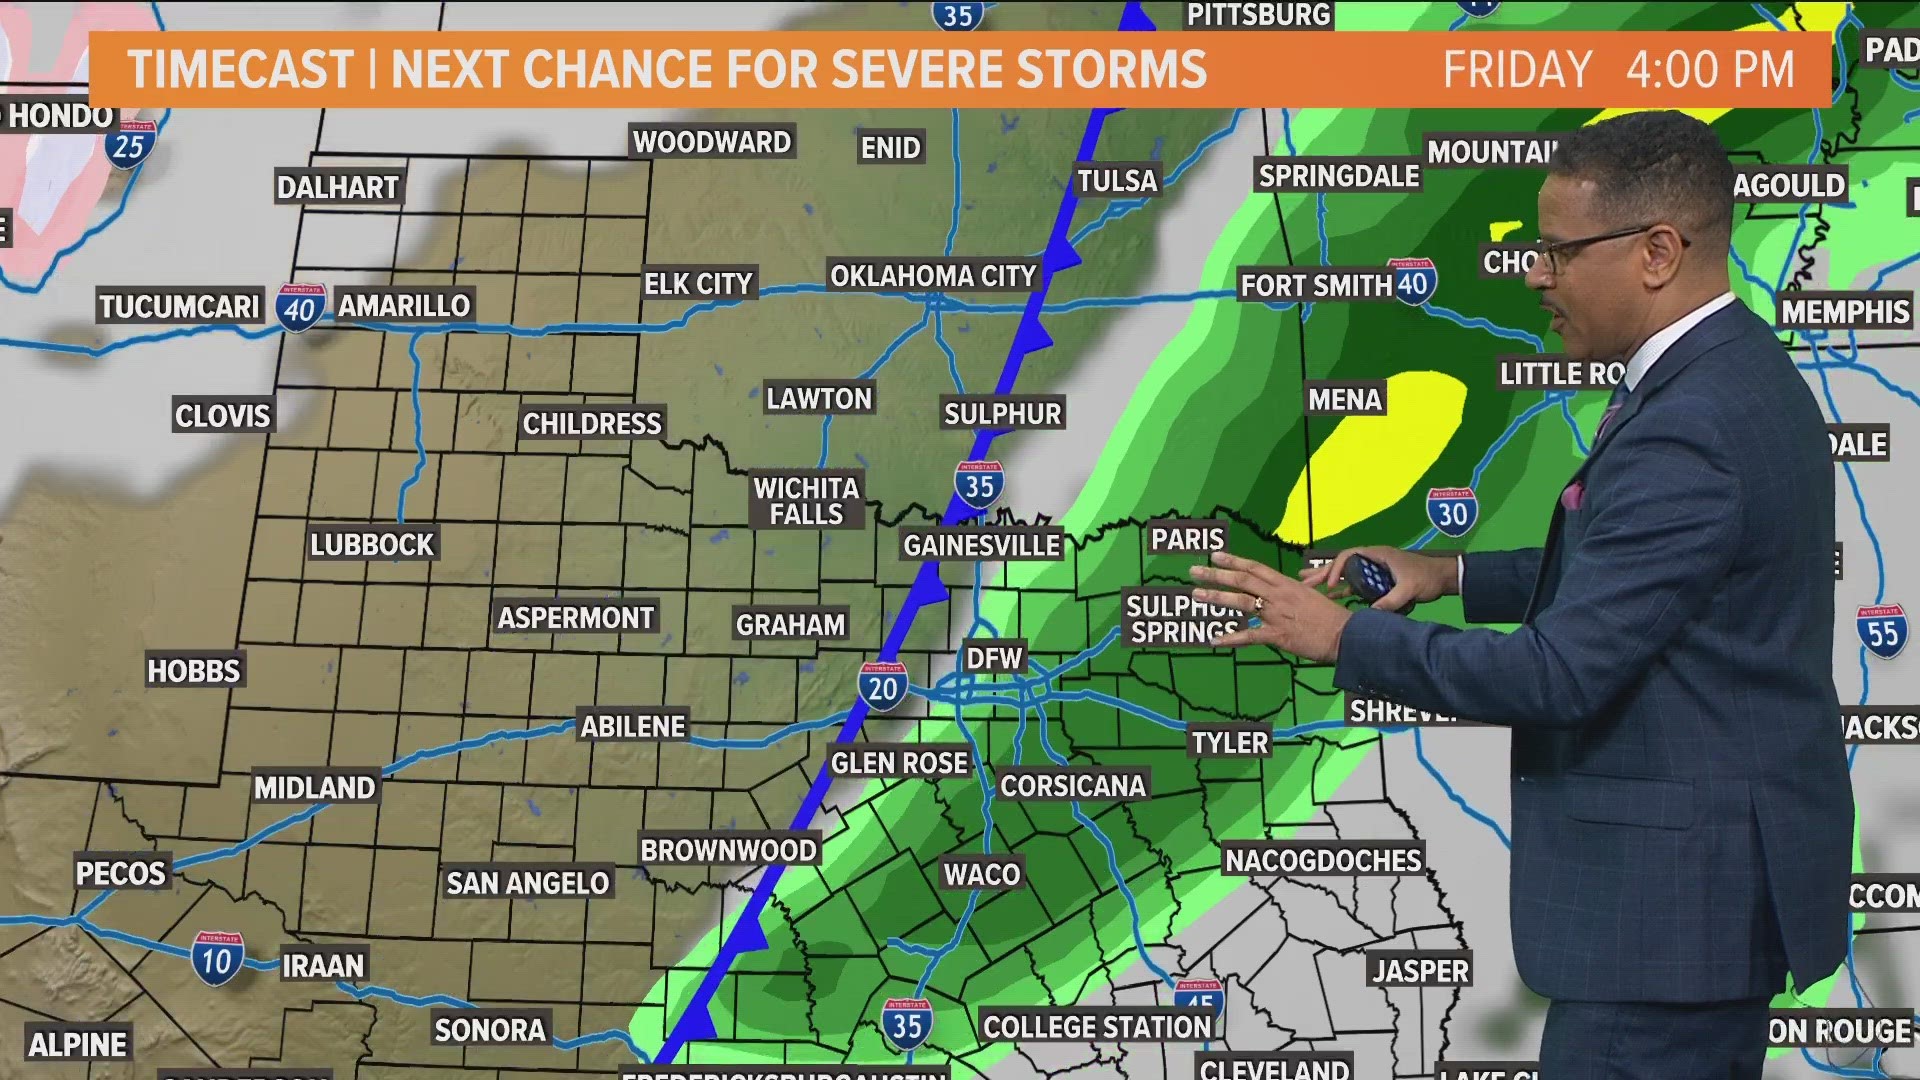 Greg Fields has a look at our storm and rain chances across North Texas this week.